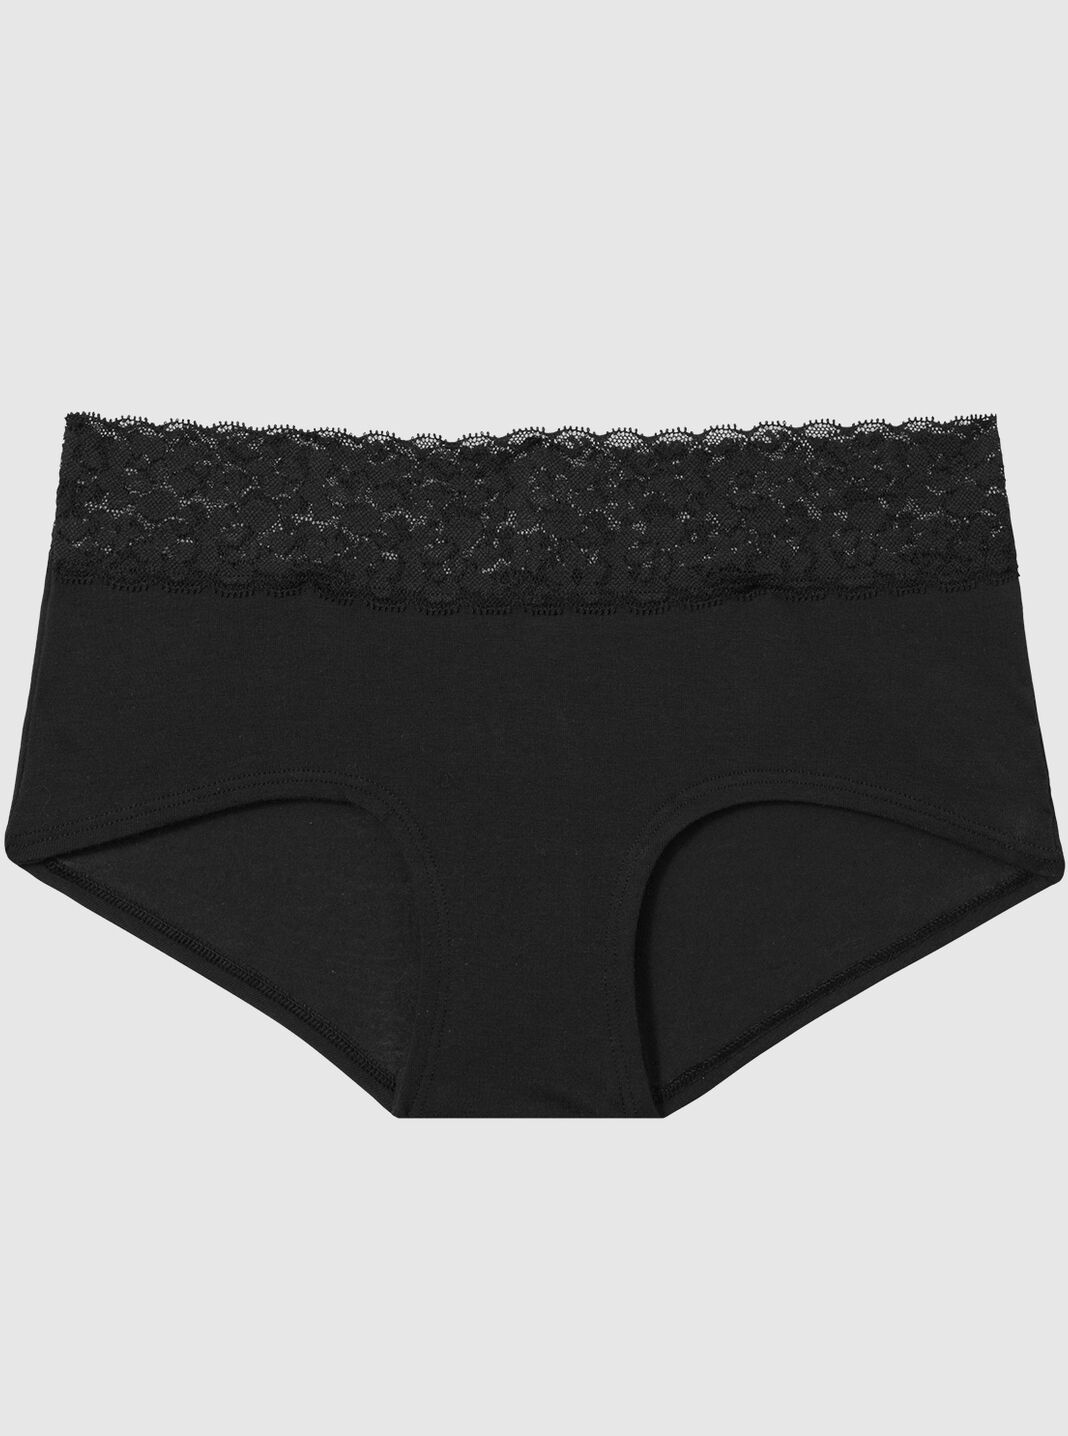 Breathable Gauze Lace Brief Panties Sexy Hollow Design, White/Black Drop  Deli Dh0K7 From Sexyhanz, $1.93